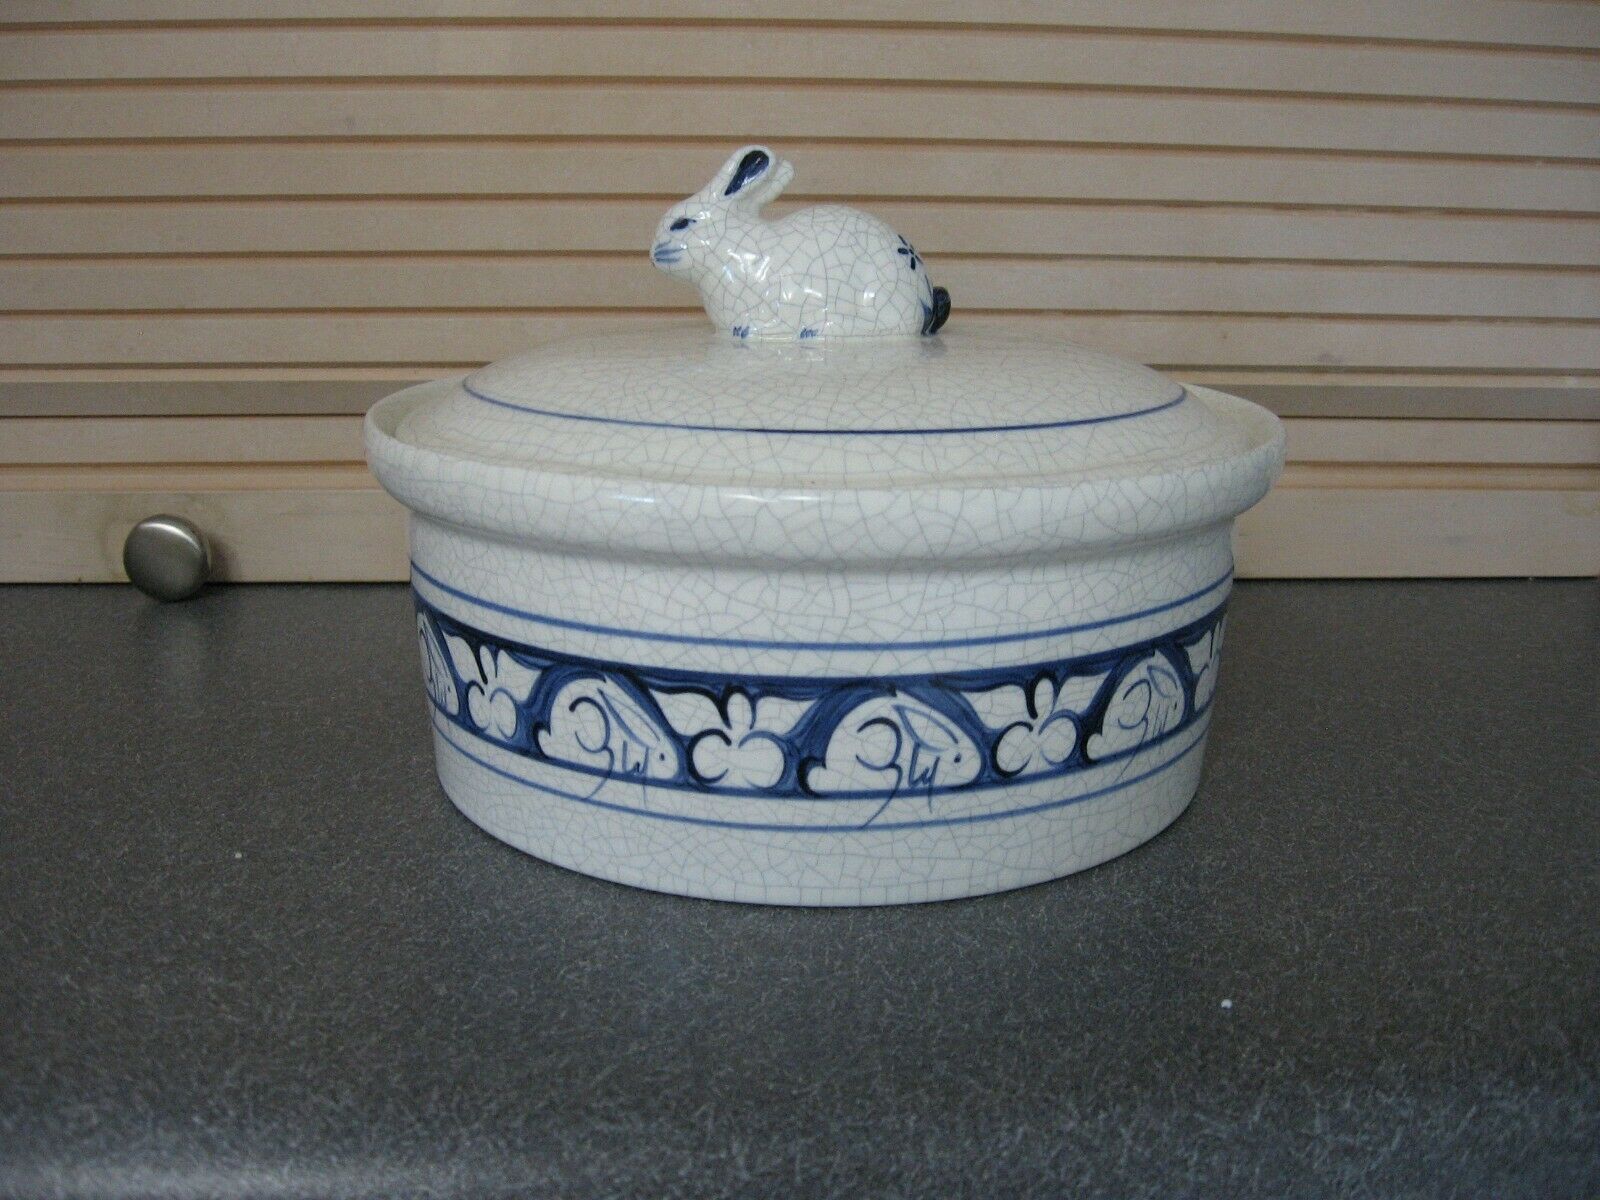 Dedham Pottery Covered Casserole 8 1/2" X 6" 88